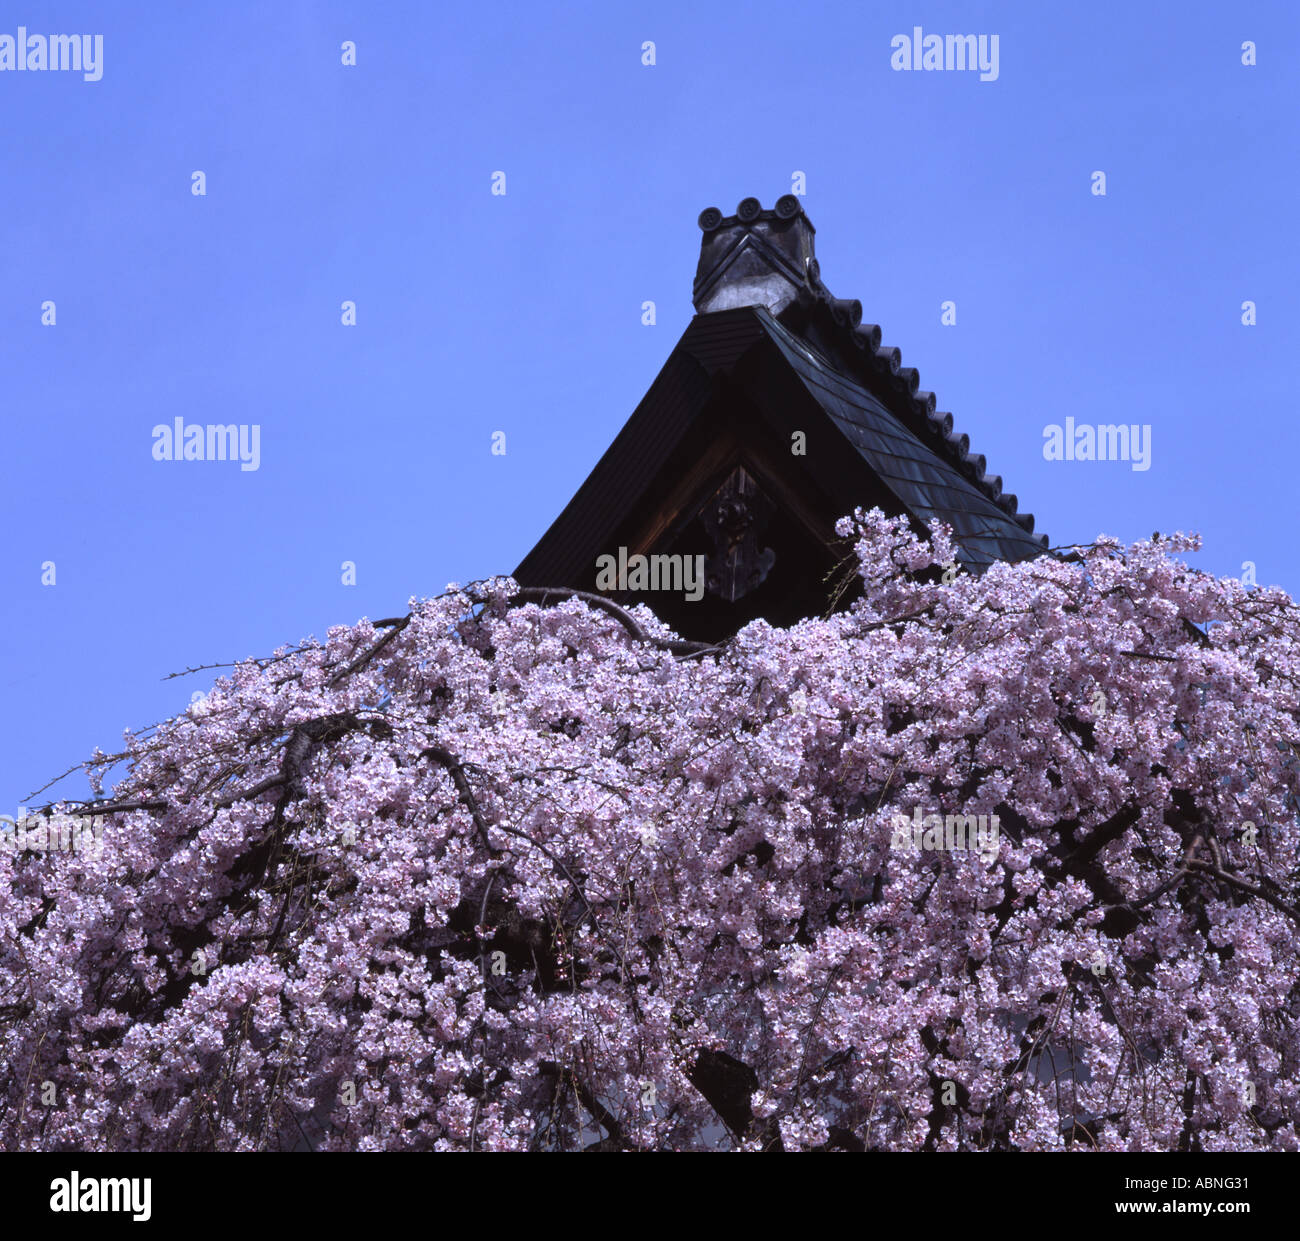 Cherry blossom blooms beside Buddhist temple roof Stock Photo